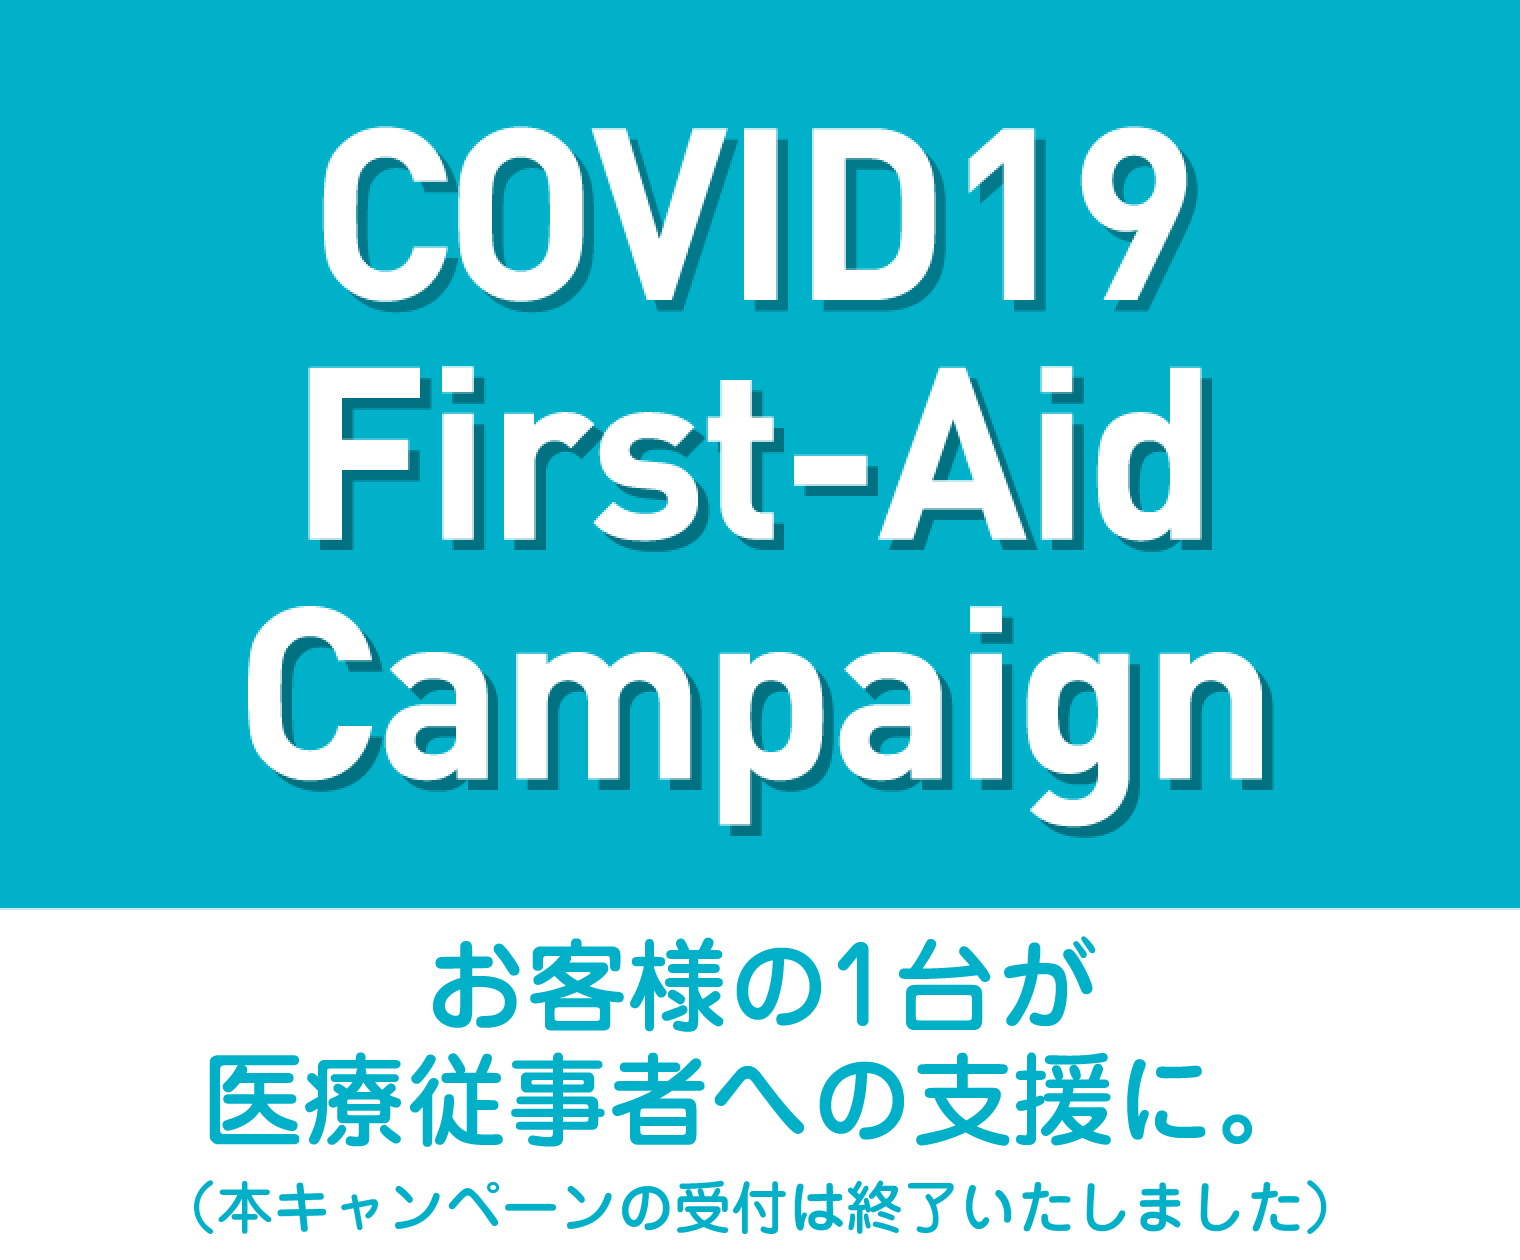 COVID19 First-Aid Campaign